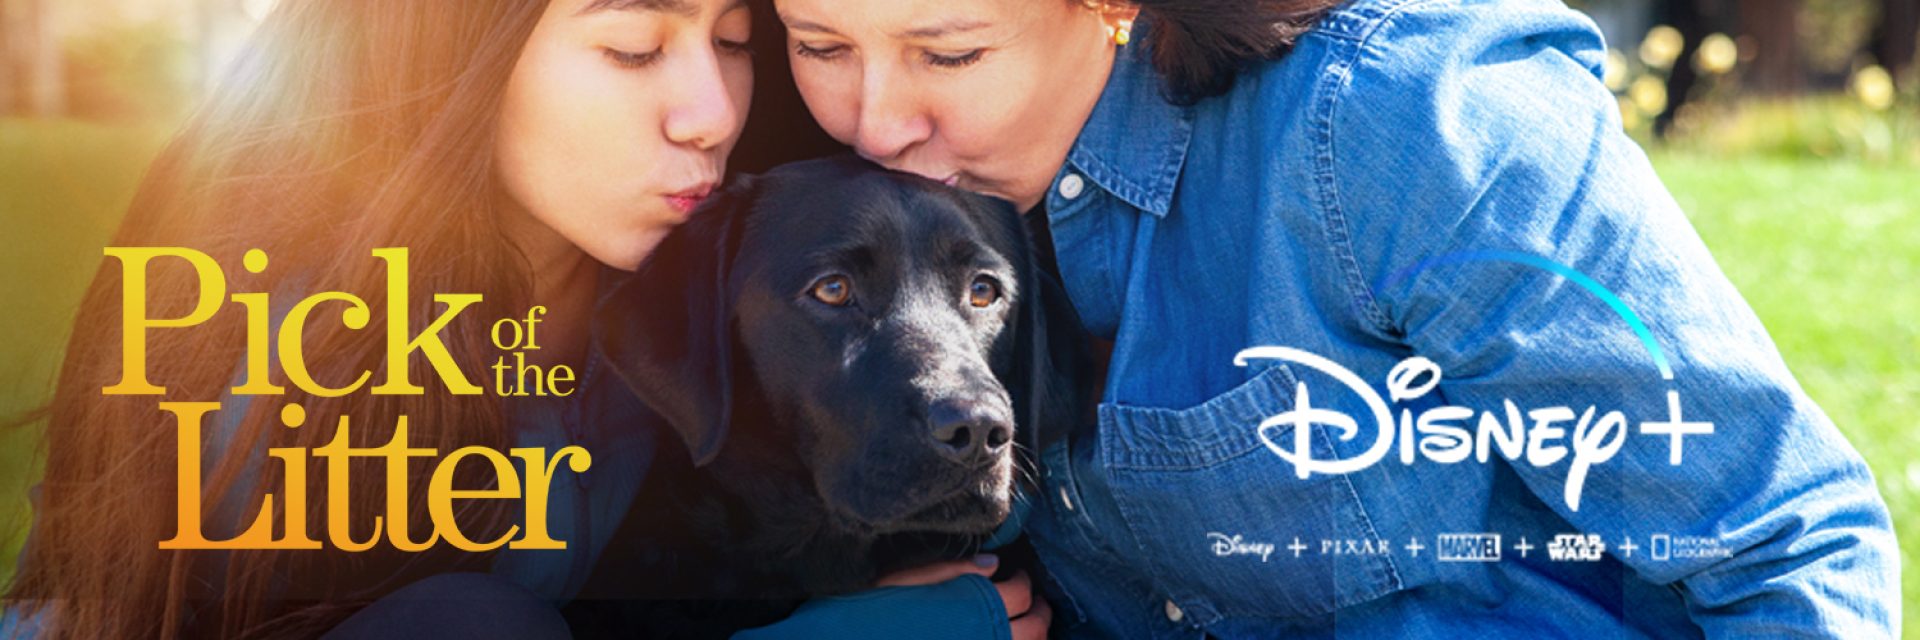 Two volunteer puppy raisers kiss the head of a black Lab guide dog. The title "Pick of the Litter" appears in the bottom left corner and the Disney Plus logo appears in the bottom right.